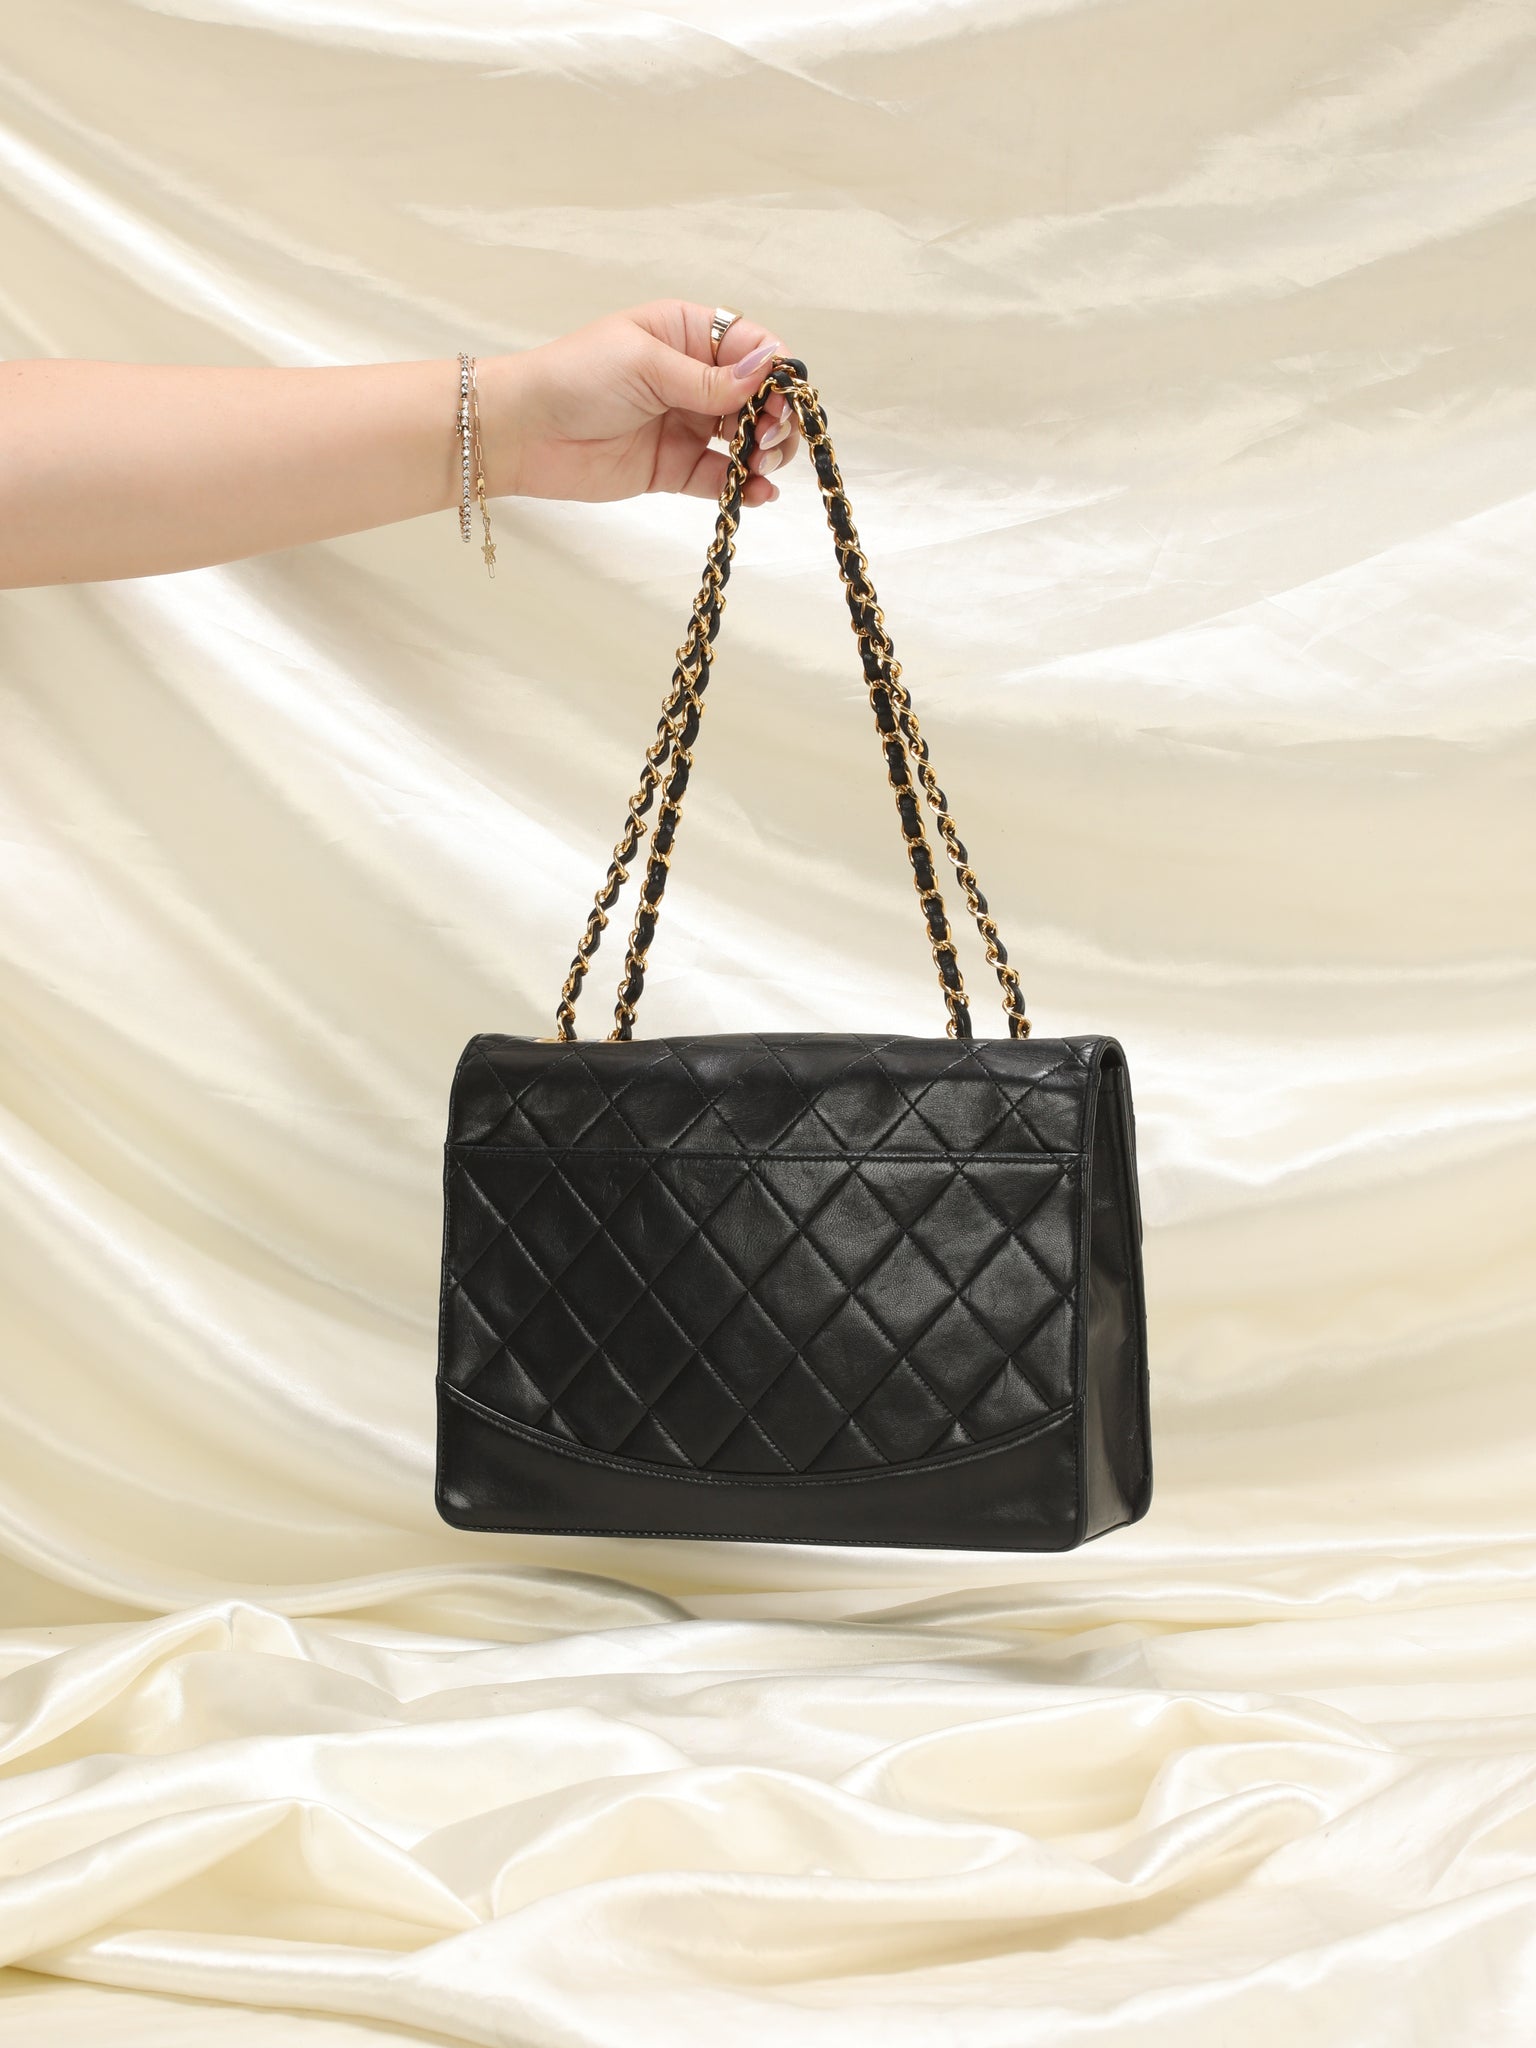 Snag the Latest CHANEL 2.55 Small Bags & Handbags for Women with Fast and  Free Shipping. Authenticity Guaranteed on Designer Handbags $500+ at .